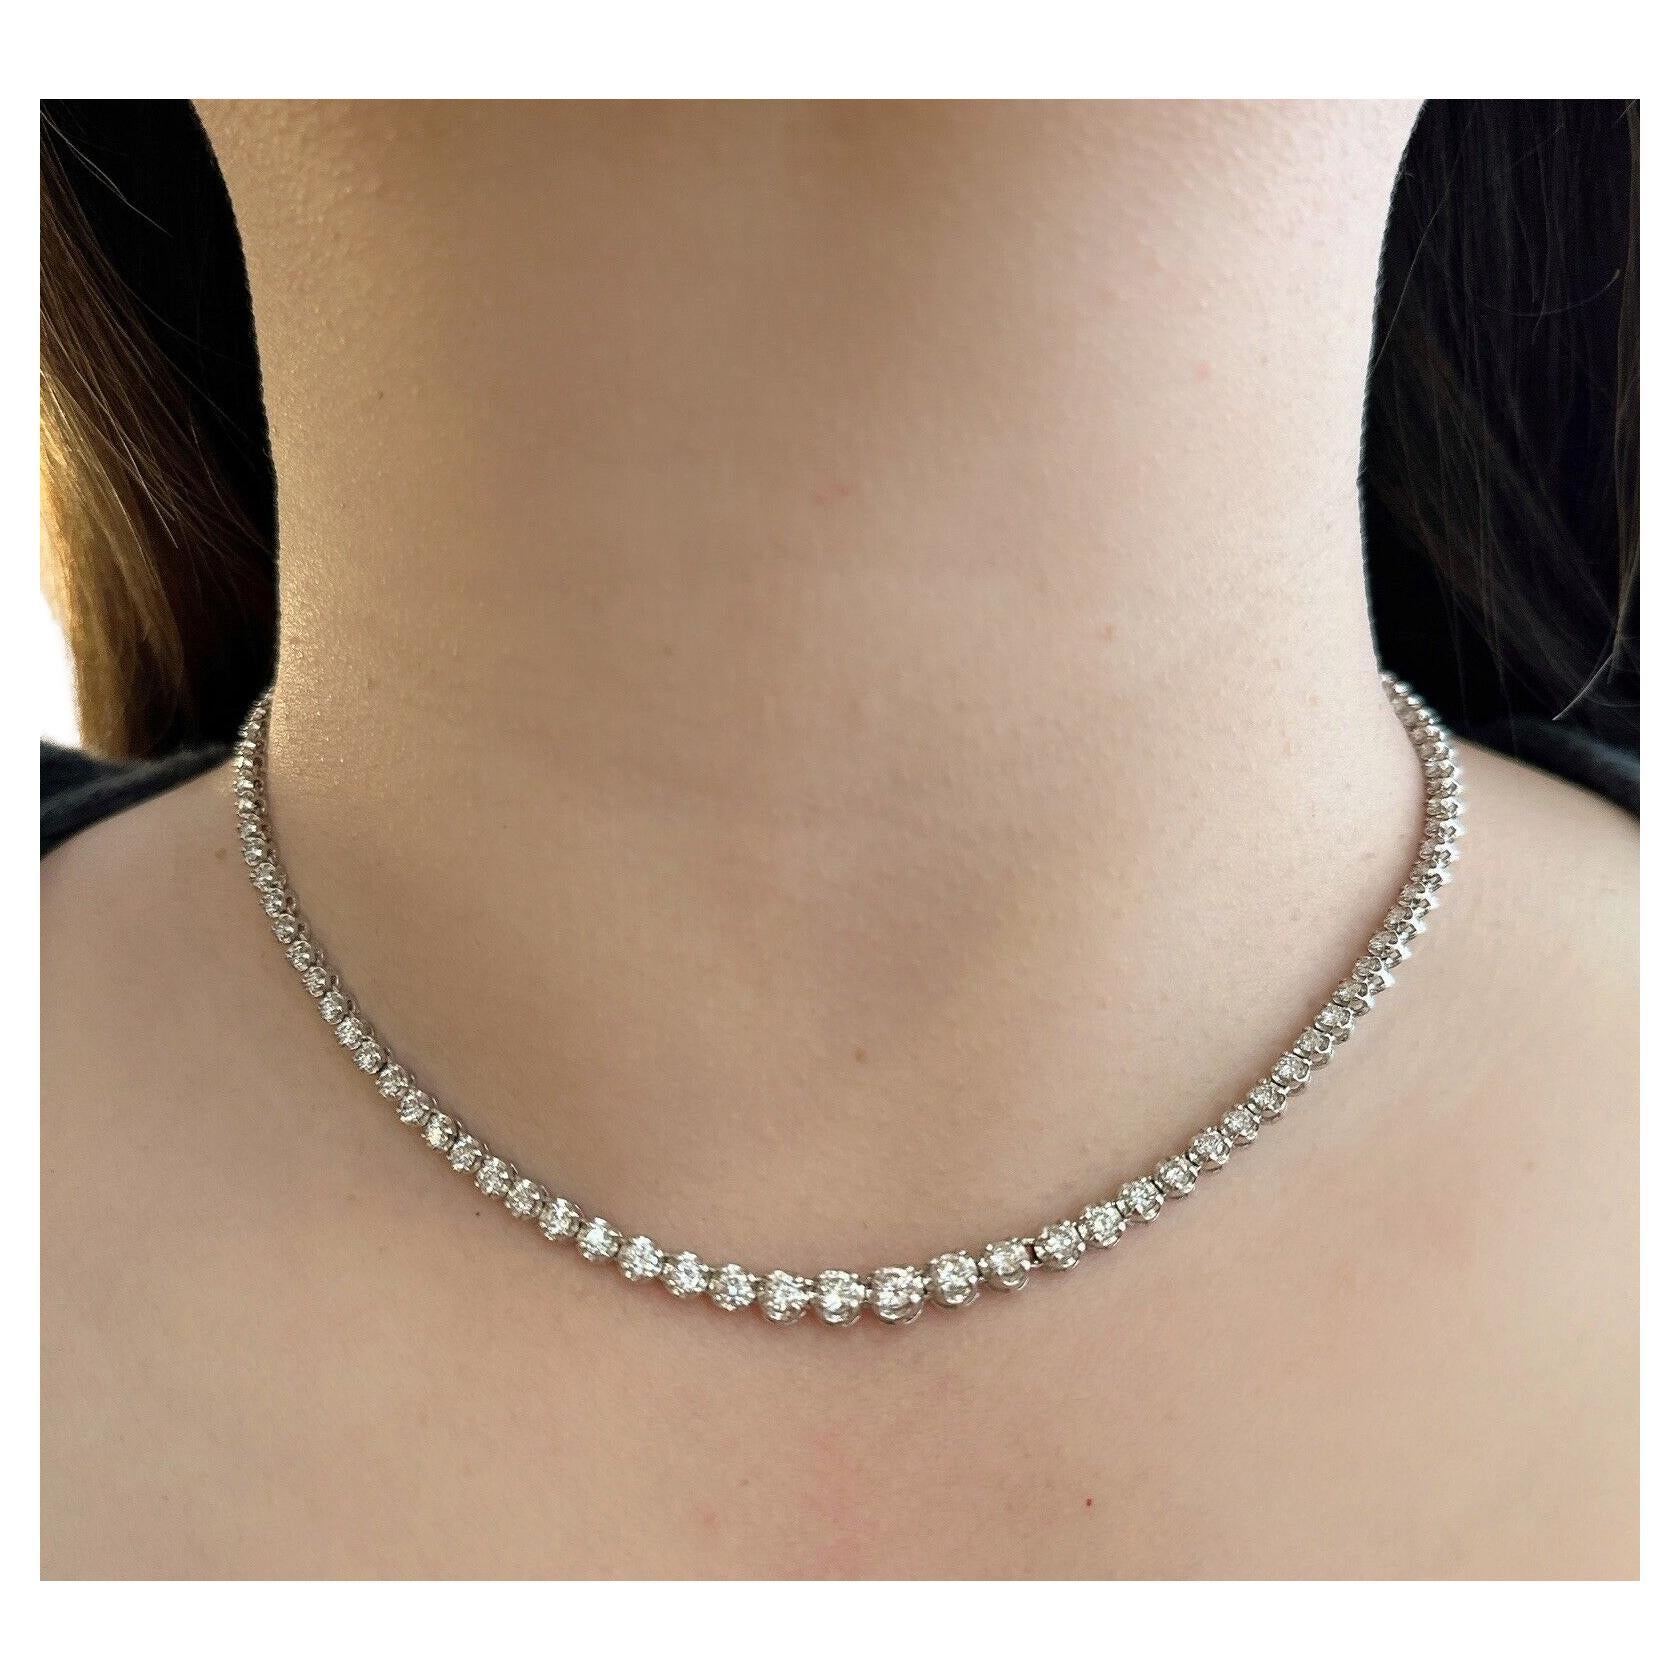 5.00 Carats Round Diamond Riviera Necklace in Platinum

Diamond Riviera Necklace features 111 Round Brilliant Cut Diamonds set in slight graduated style in a Platinum setting.

Total diamond weight is 5.00 carats. All diamonds are bright and lively